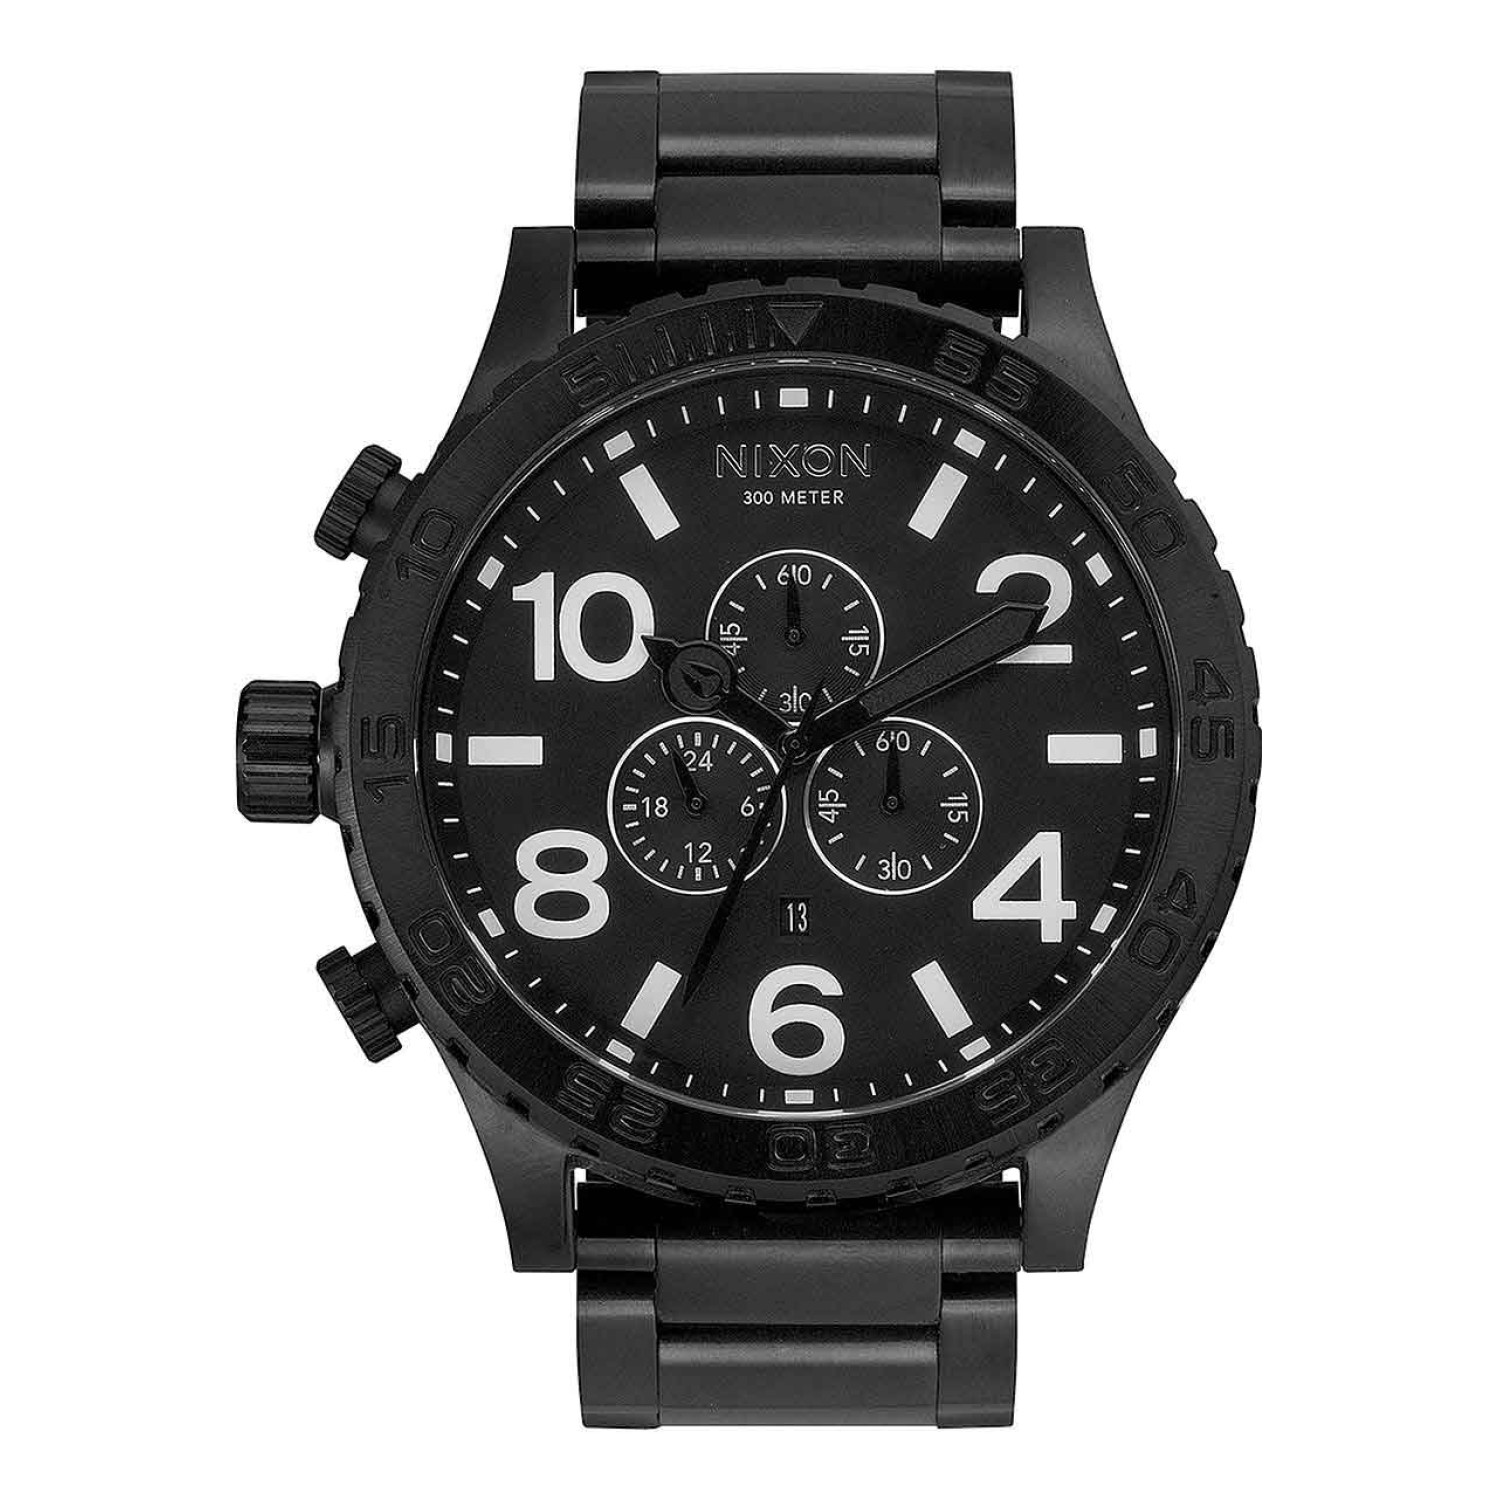 A083-001-00 NIXON Mens 51-30 Chronograph Watch. Good looks, brains and brawn combined. The 51-30 Chrono rates second-to-none. Handsome, easy-to-read 51 mm design that launched the oversized trend, with 3 CD textured sub-dials2 Year  Guarantee Oxipay is @c